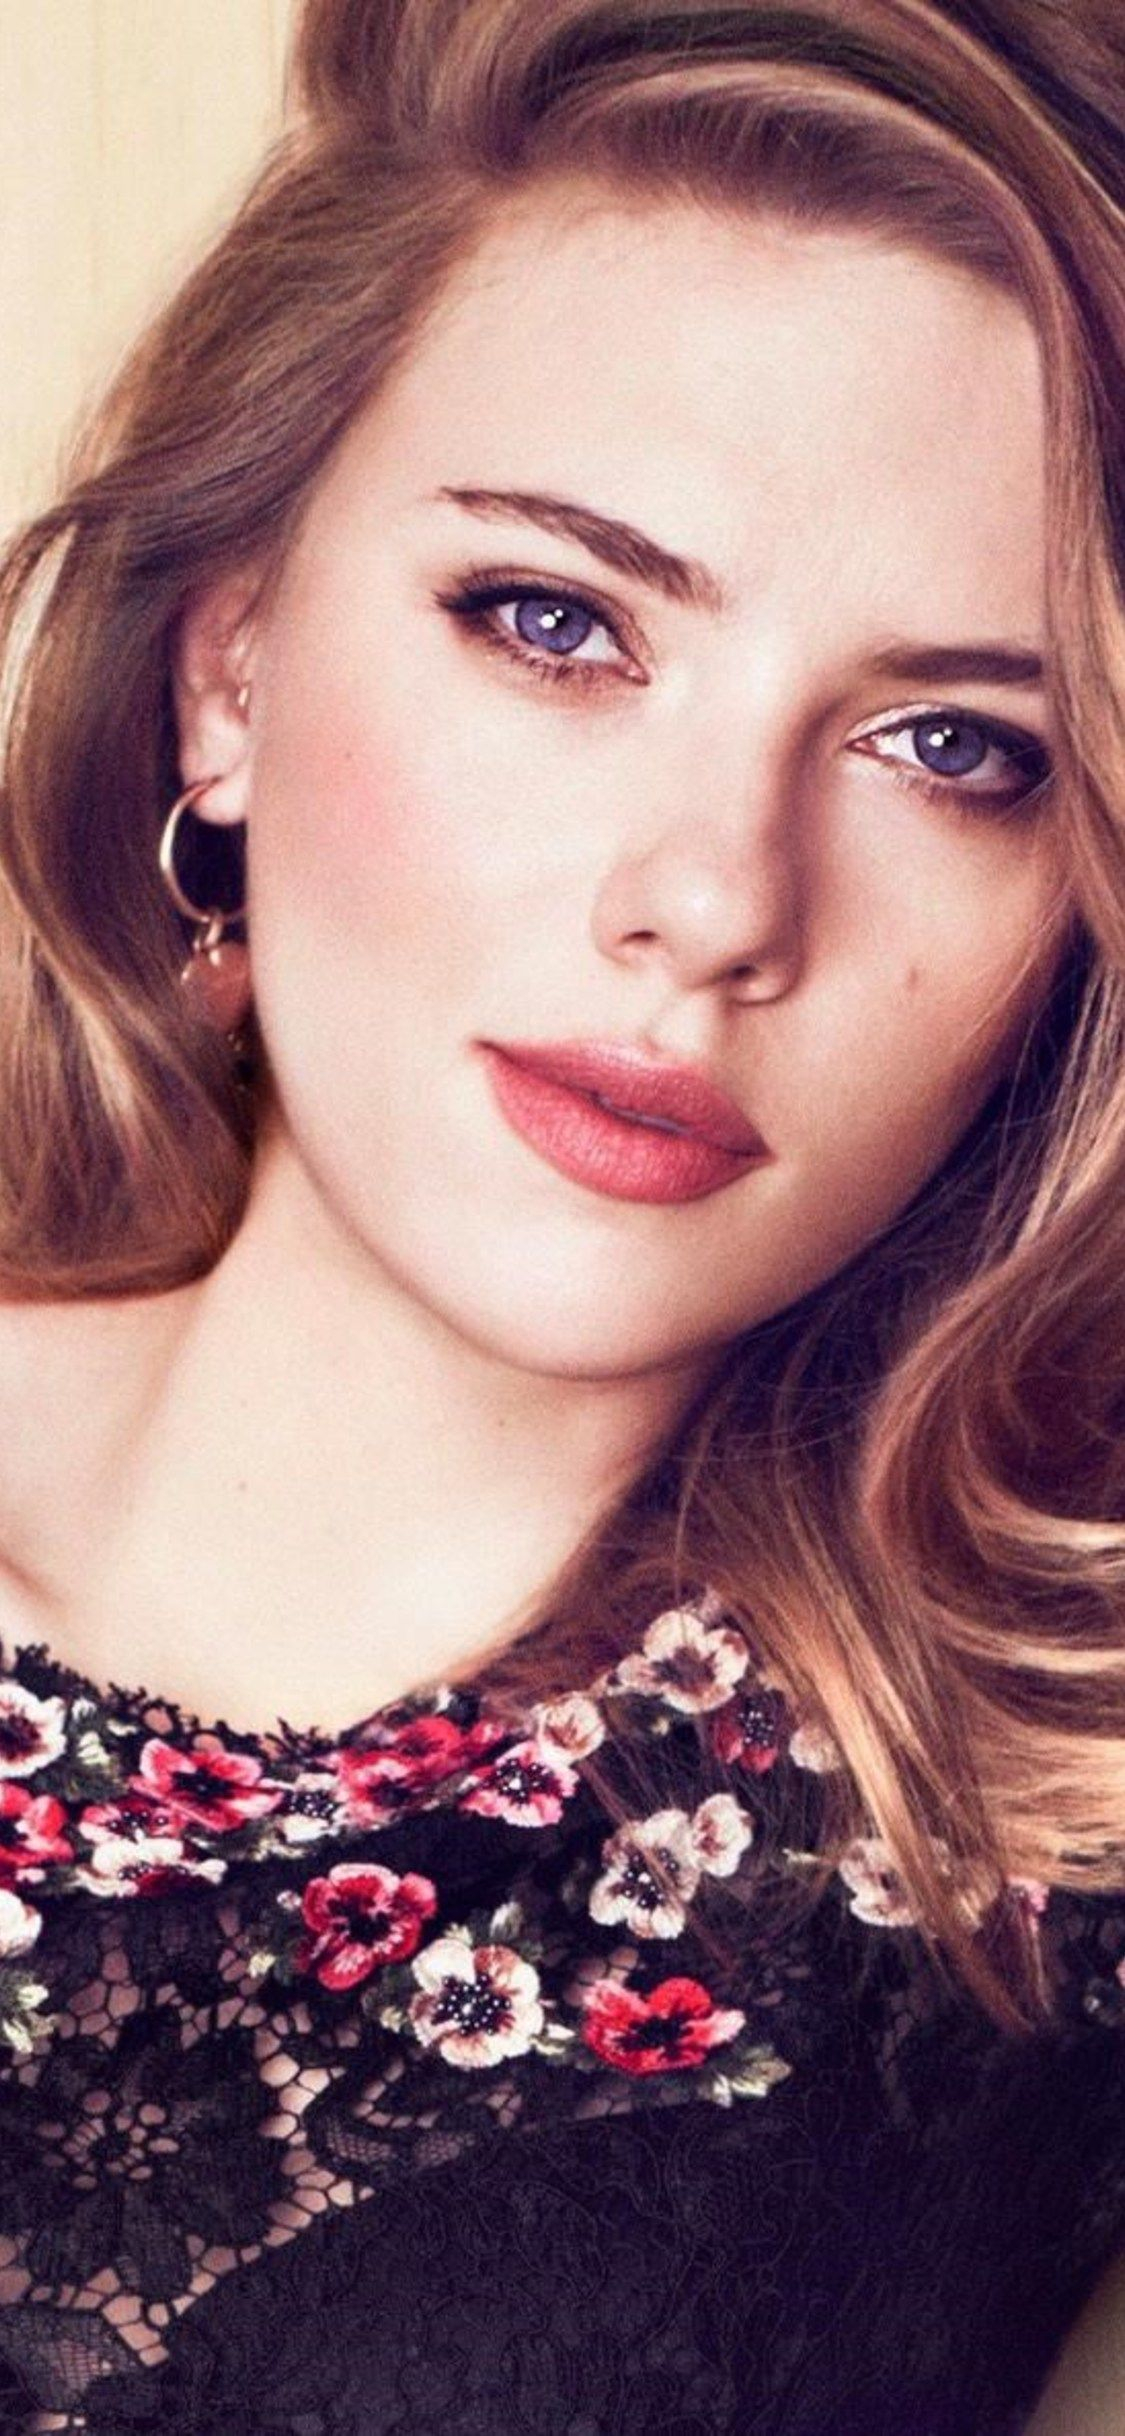 1125x2436 Featured Scarlett Johansson Iphone XS,Iphone 10,Iphone X HD 4k Wallpapers, Images, Backgrounds&acirc;&#128;&brvbar; | Scarlet johansson, Scarlett johansson, Scarlett johans